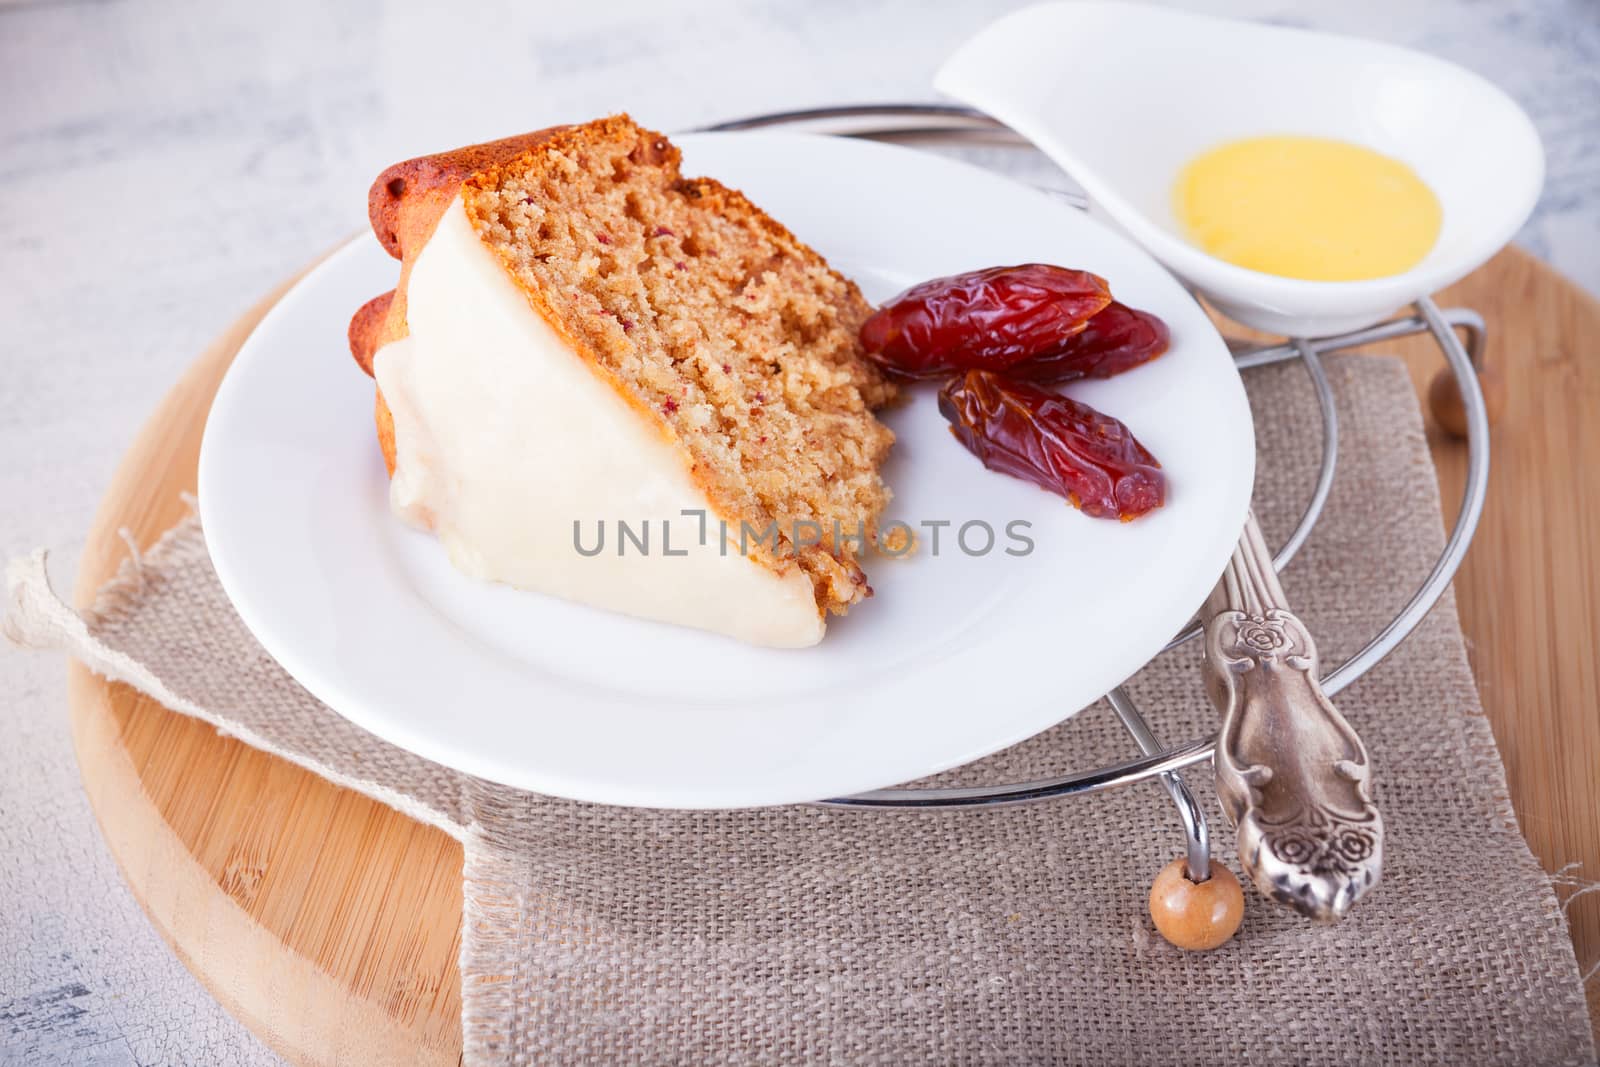 Slice of date cake and dates on a white plate